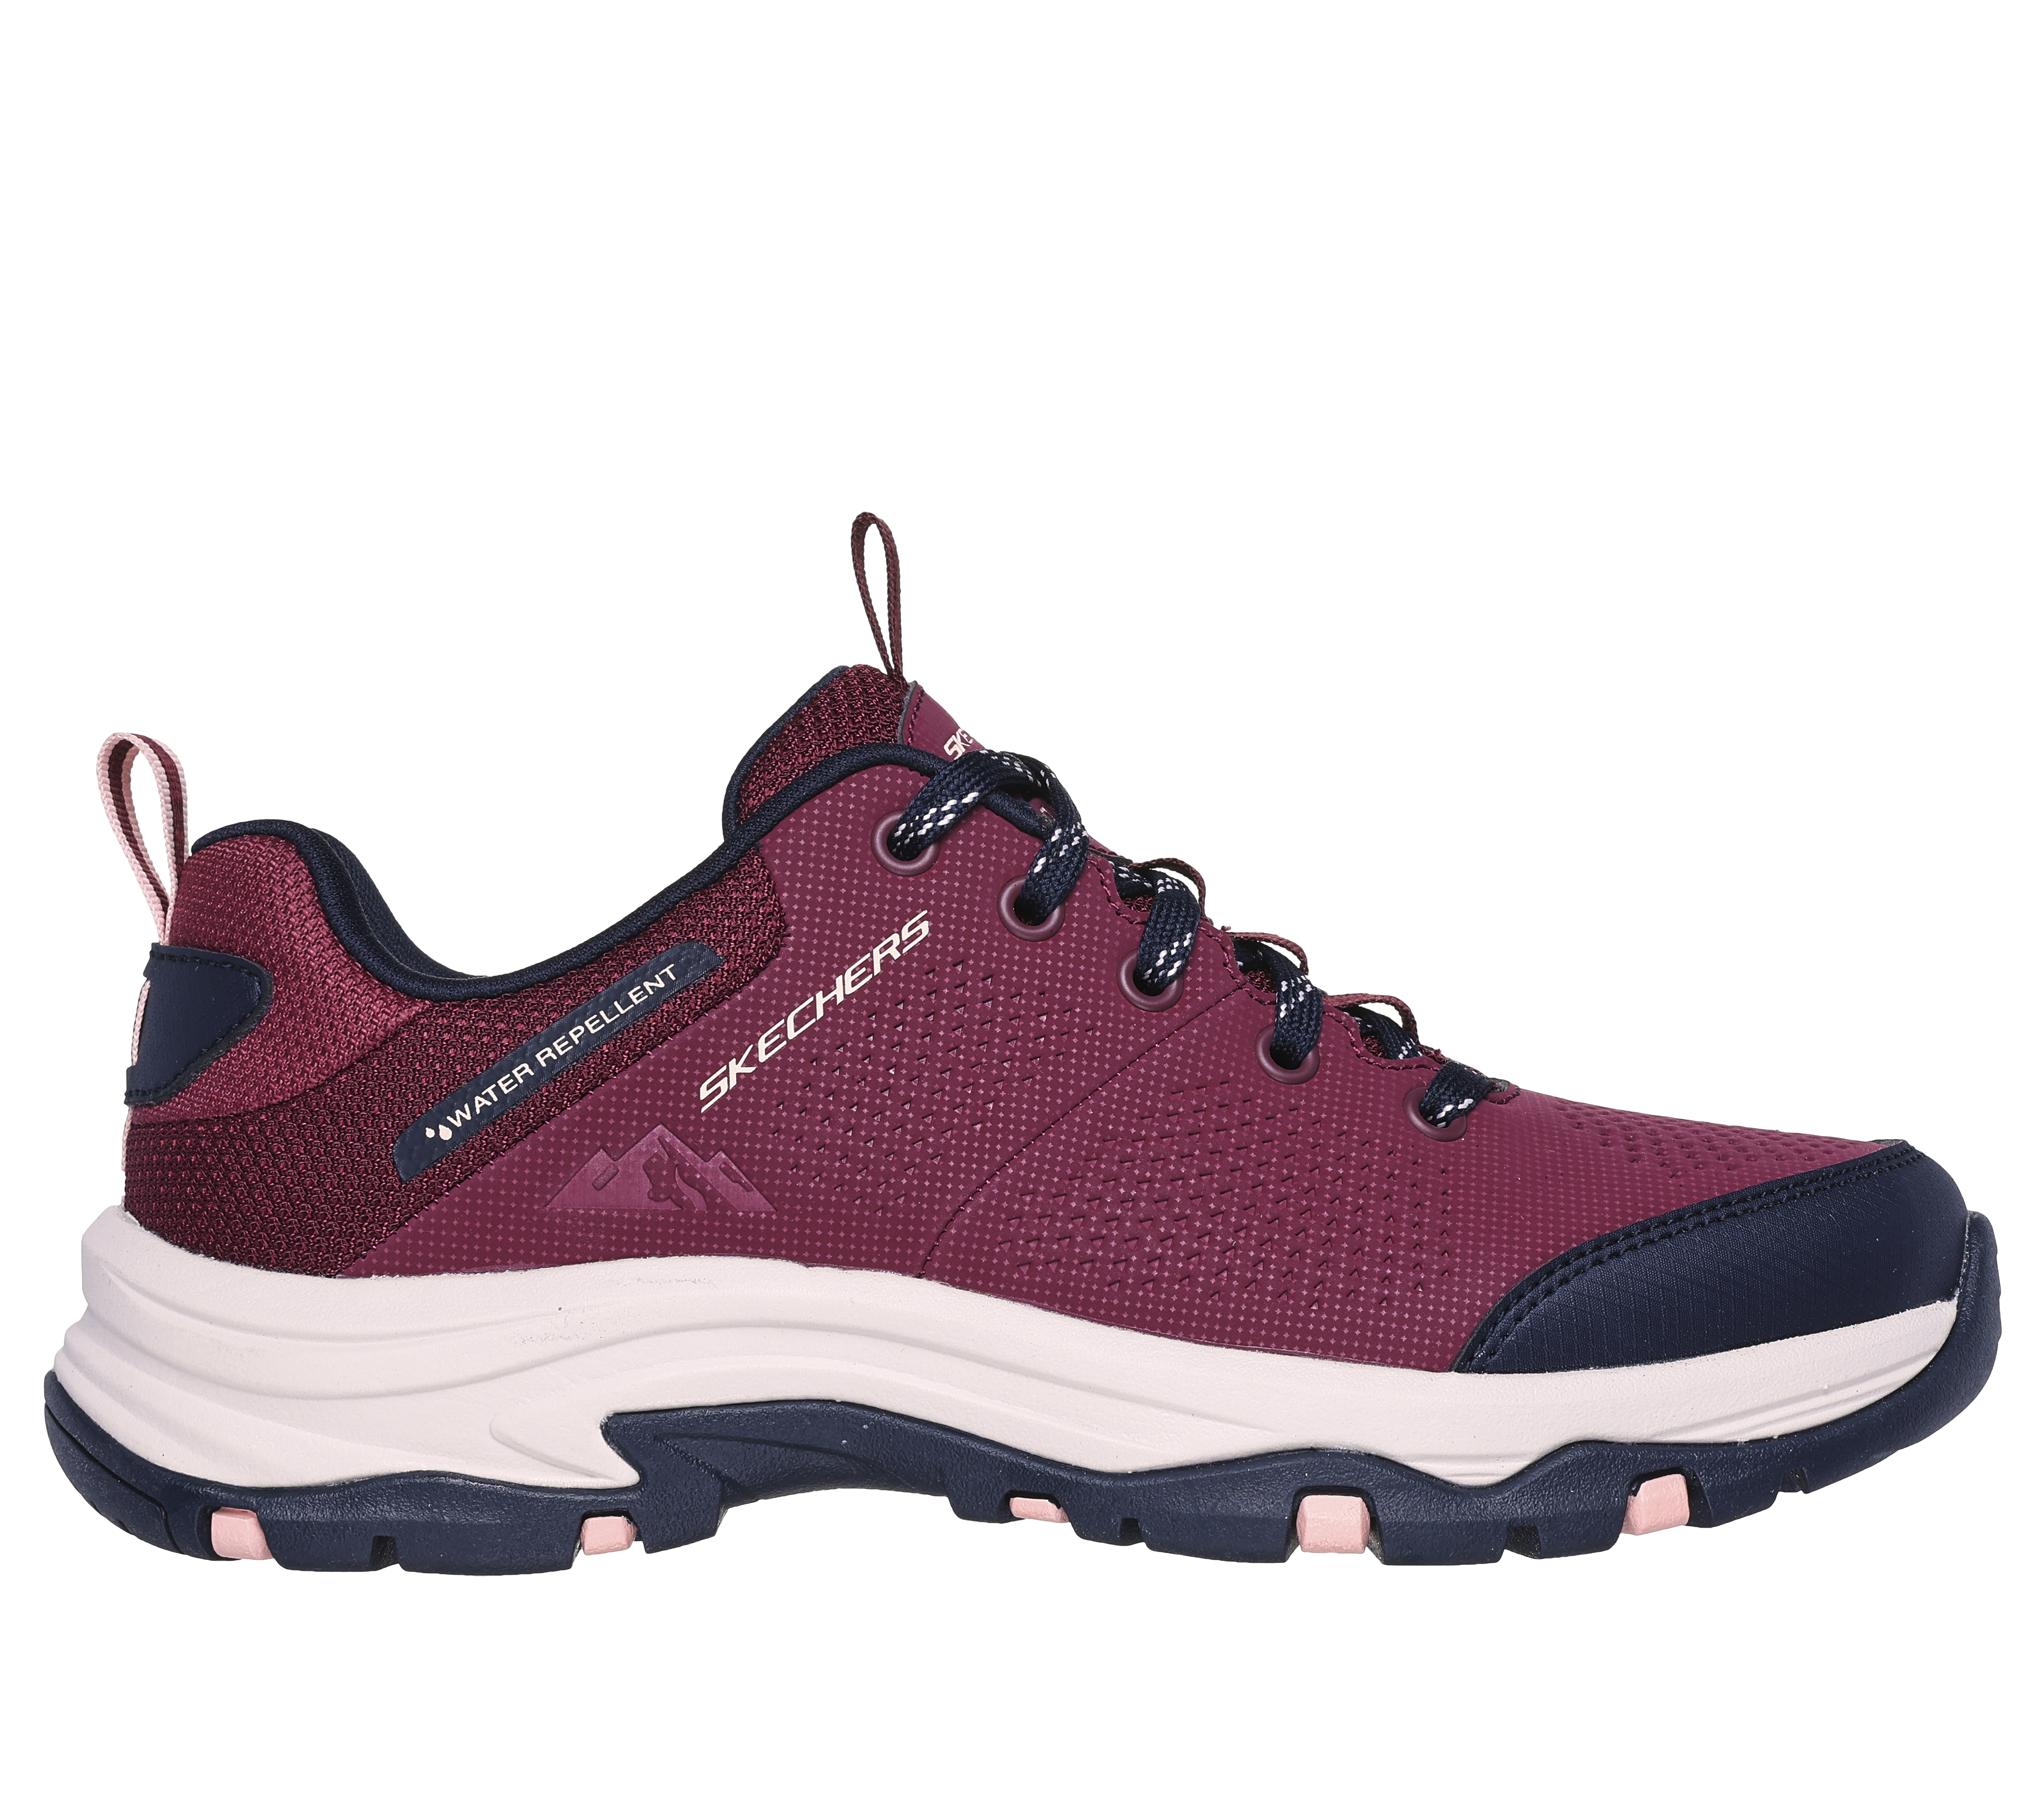 Shop the Relaxed Fit: Trego - Trail Destiny | SKECHERS CA